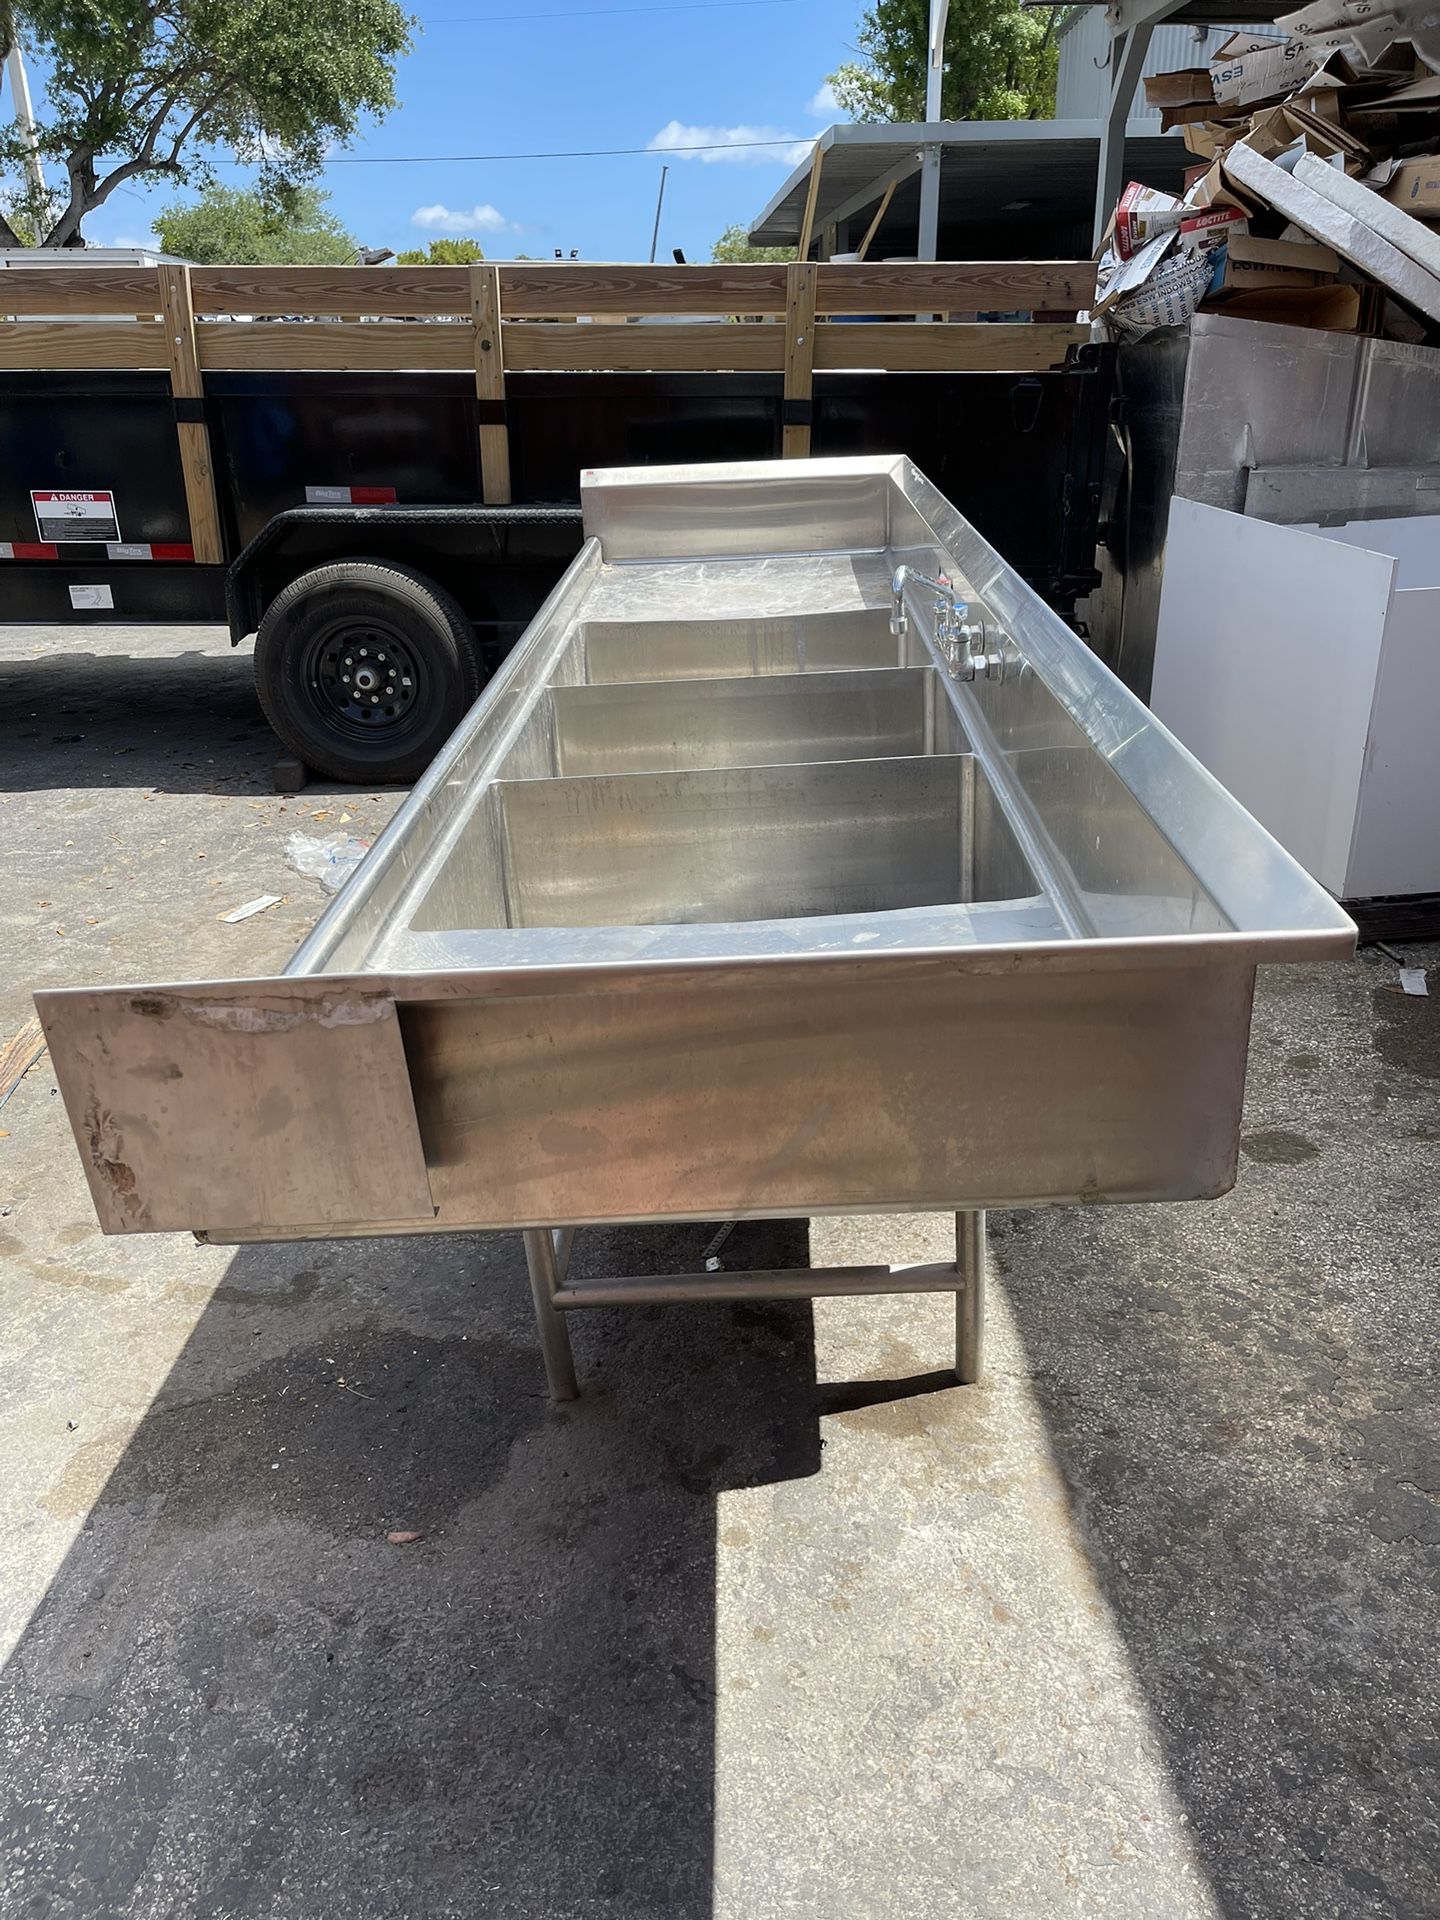 Large Commercial Grade 3 Compartment Sink With 2 Drain Boards